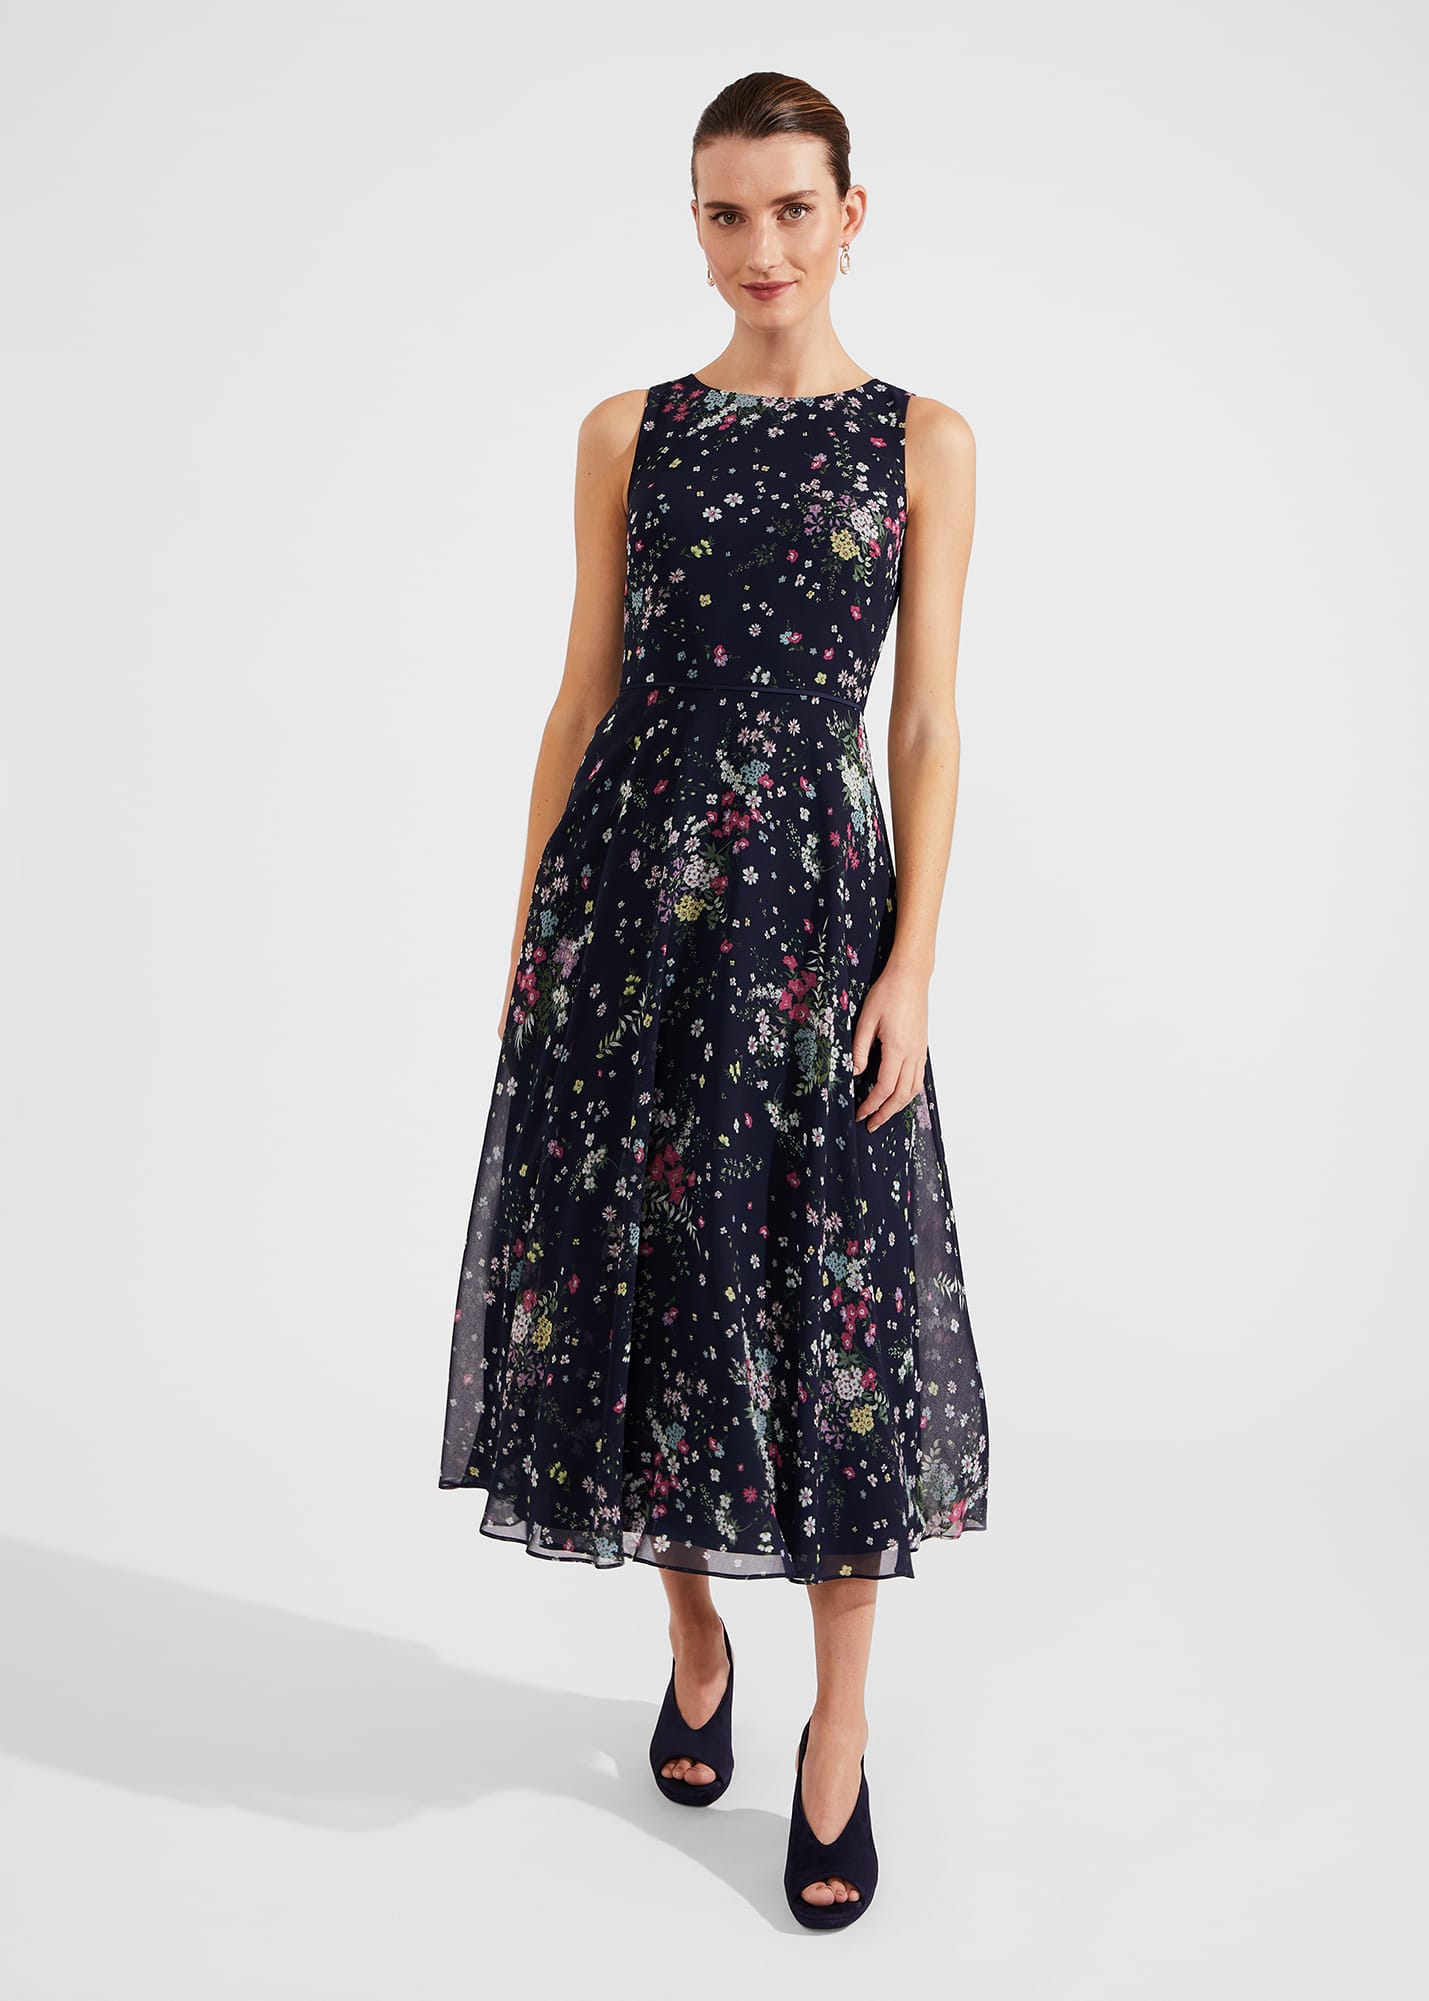 Hobbs Women's Petite Carly Floral Fit And Flare Dress - Navy Multi